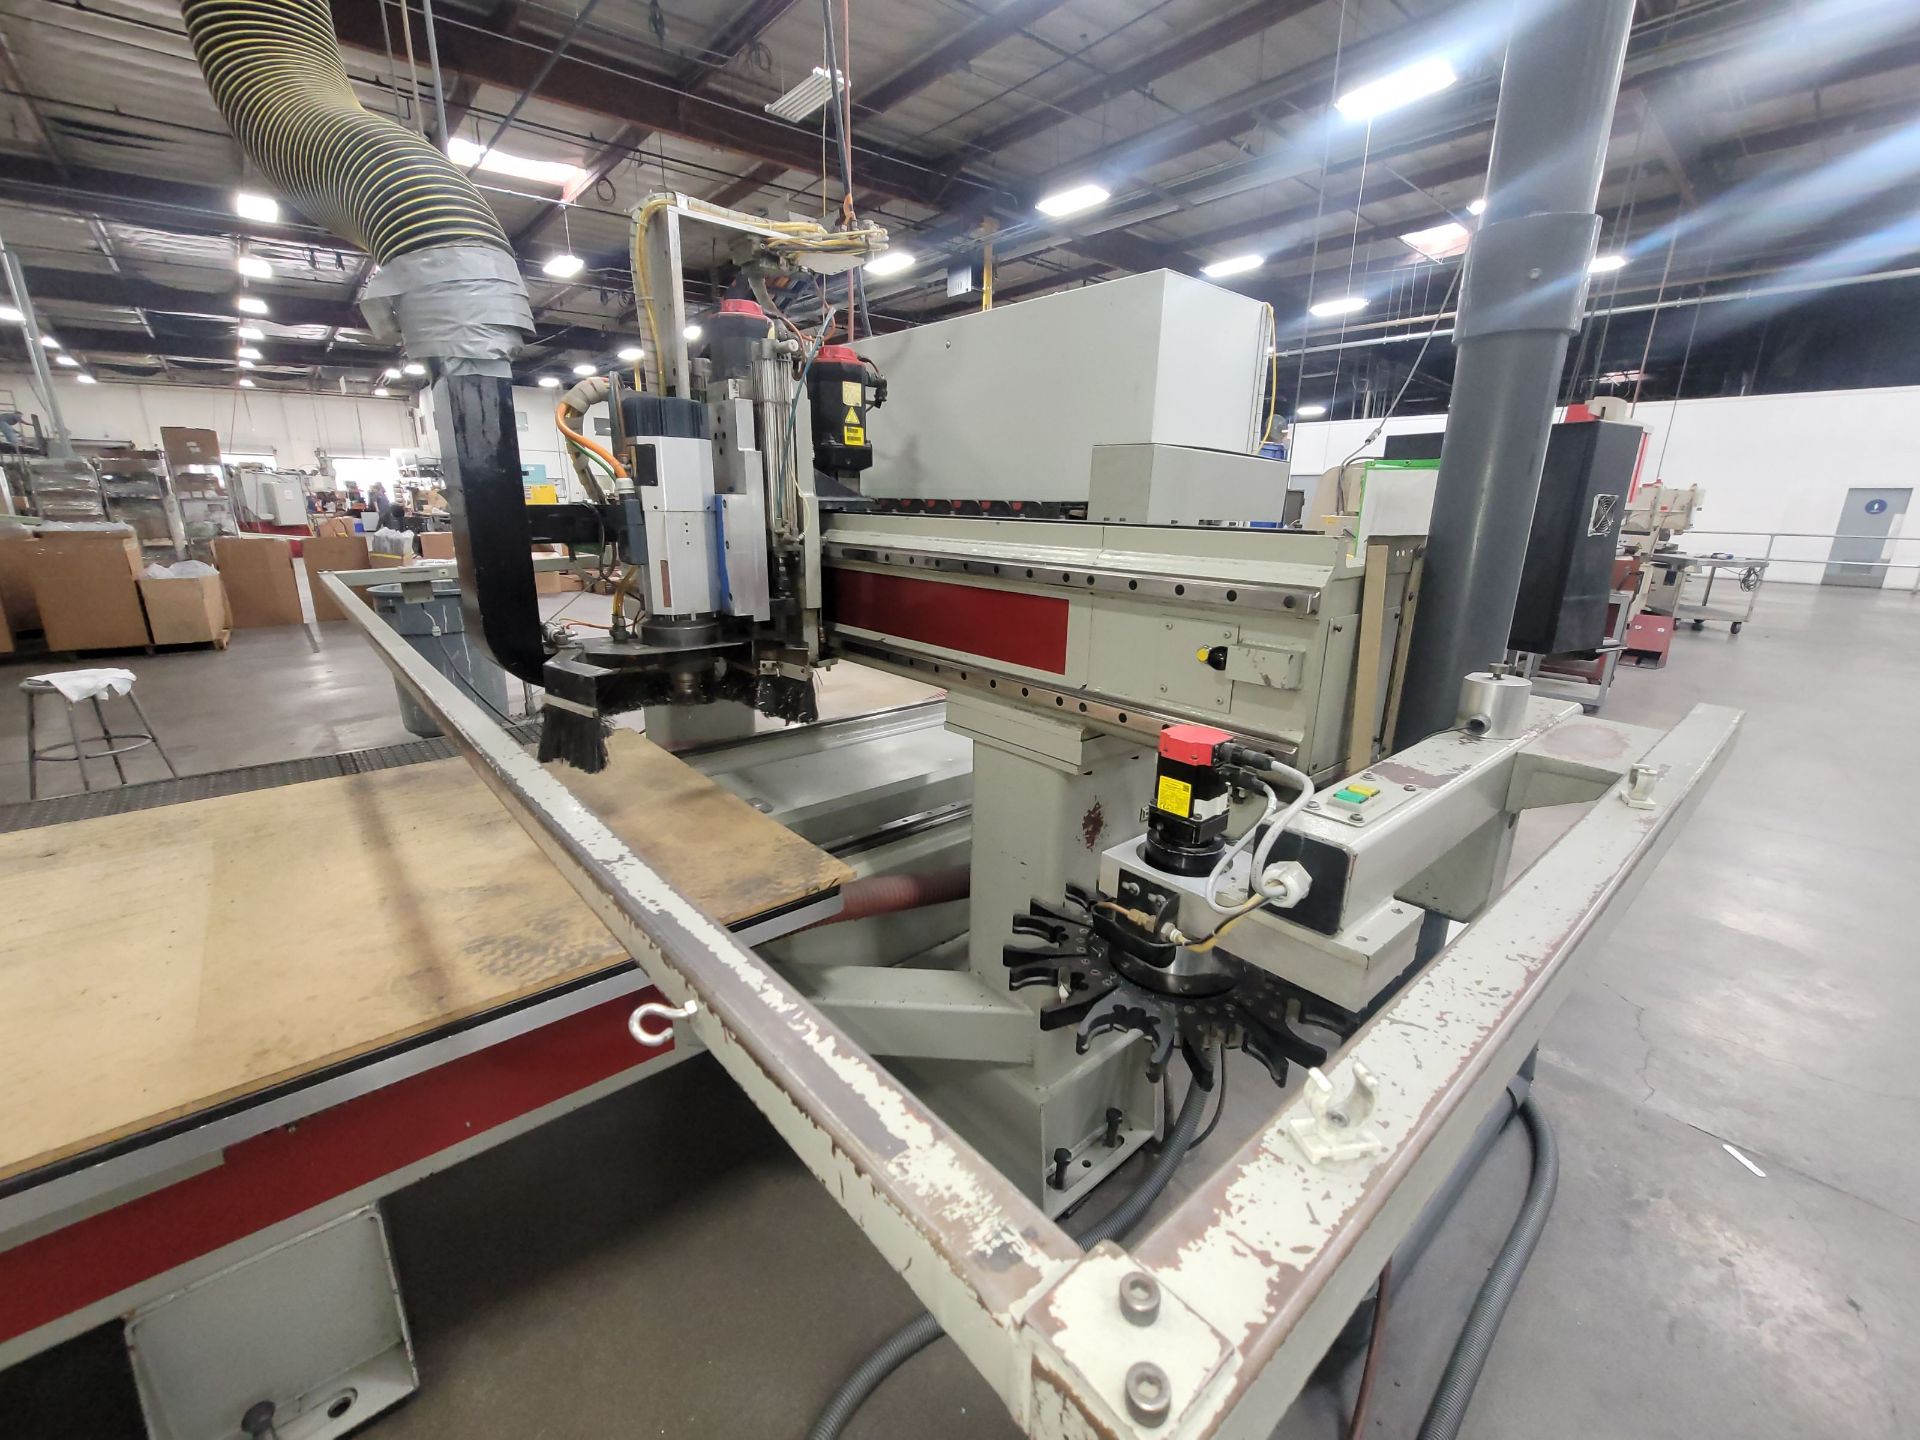 2011 KOMO CNC ROUTER, MODEL MACH ONE BT 512, S/N 01091-10 - Image 2 of 8